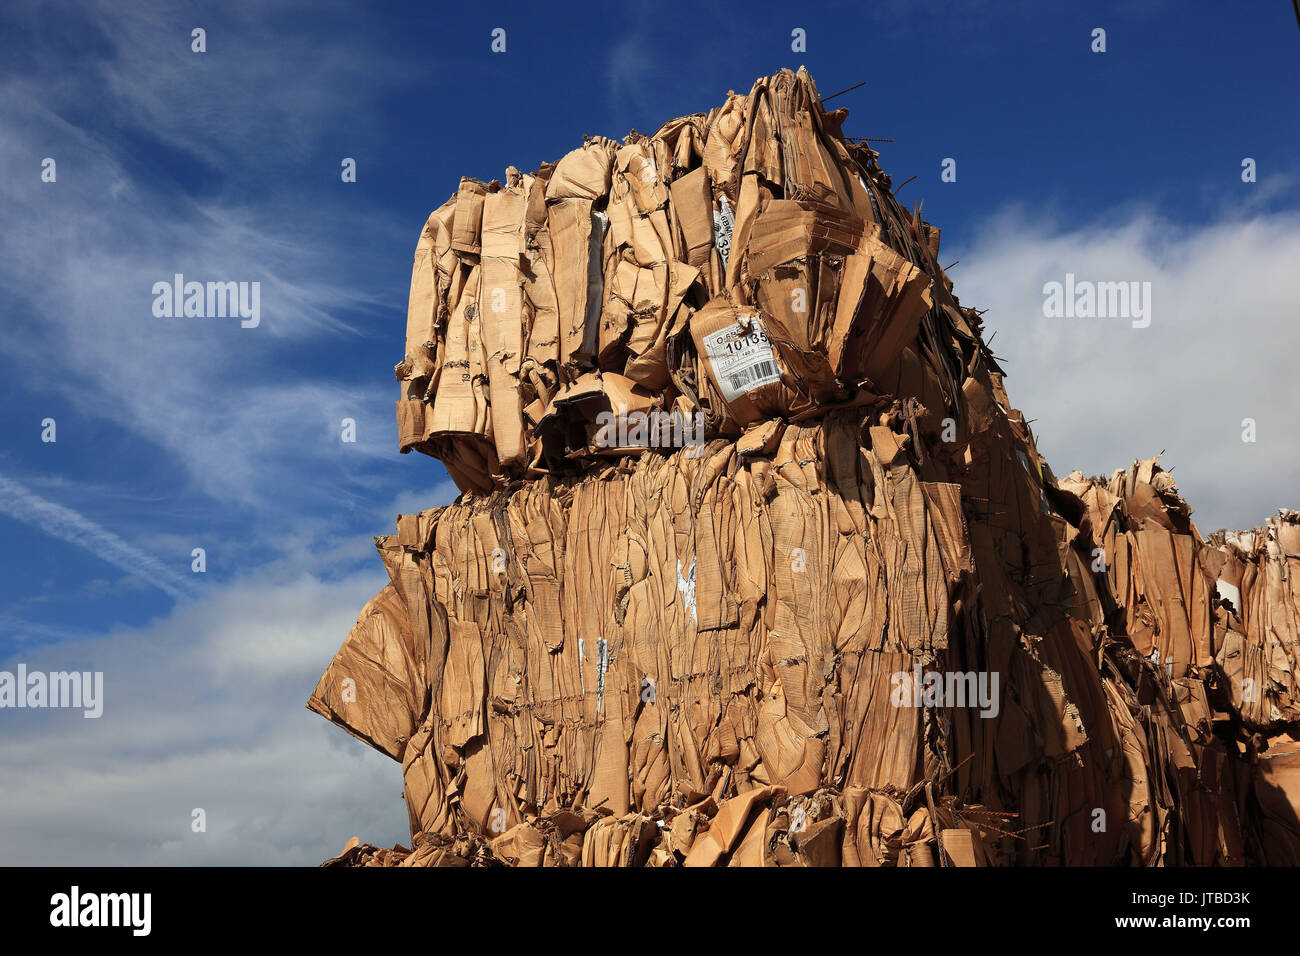 Waste paper, stacked bales with cardboard packagings in a recycling company, Altpapier, gestapelte Ballen mit Kartonagen in einem Recyclingbetrieb Stock Photo